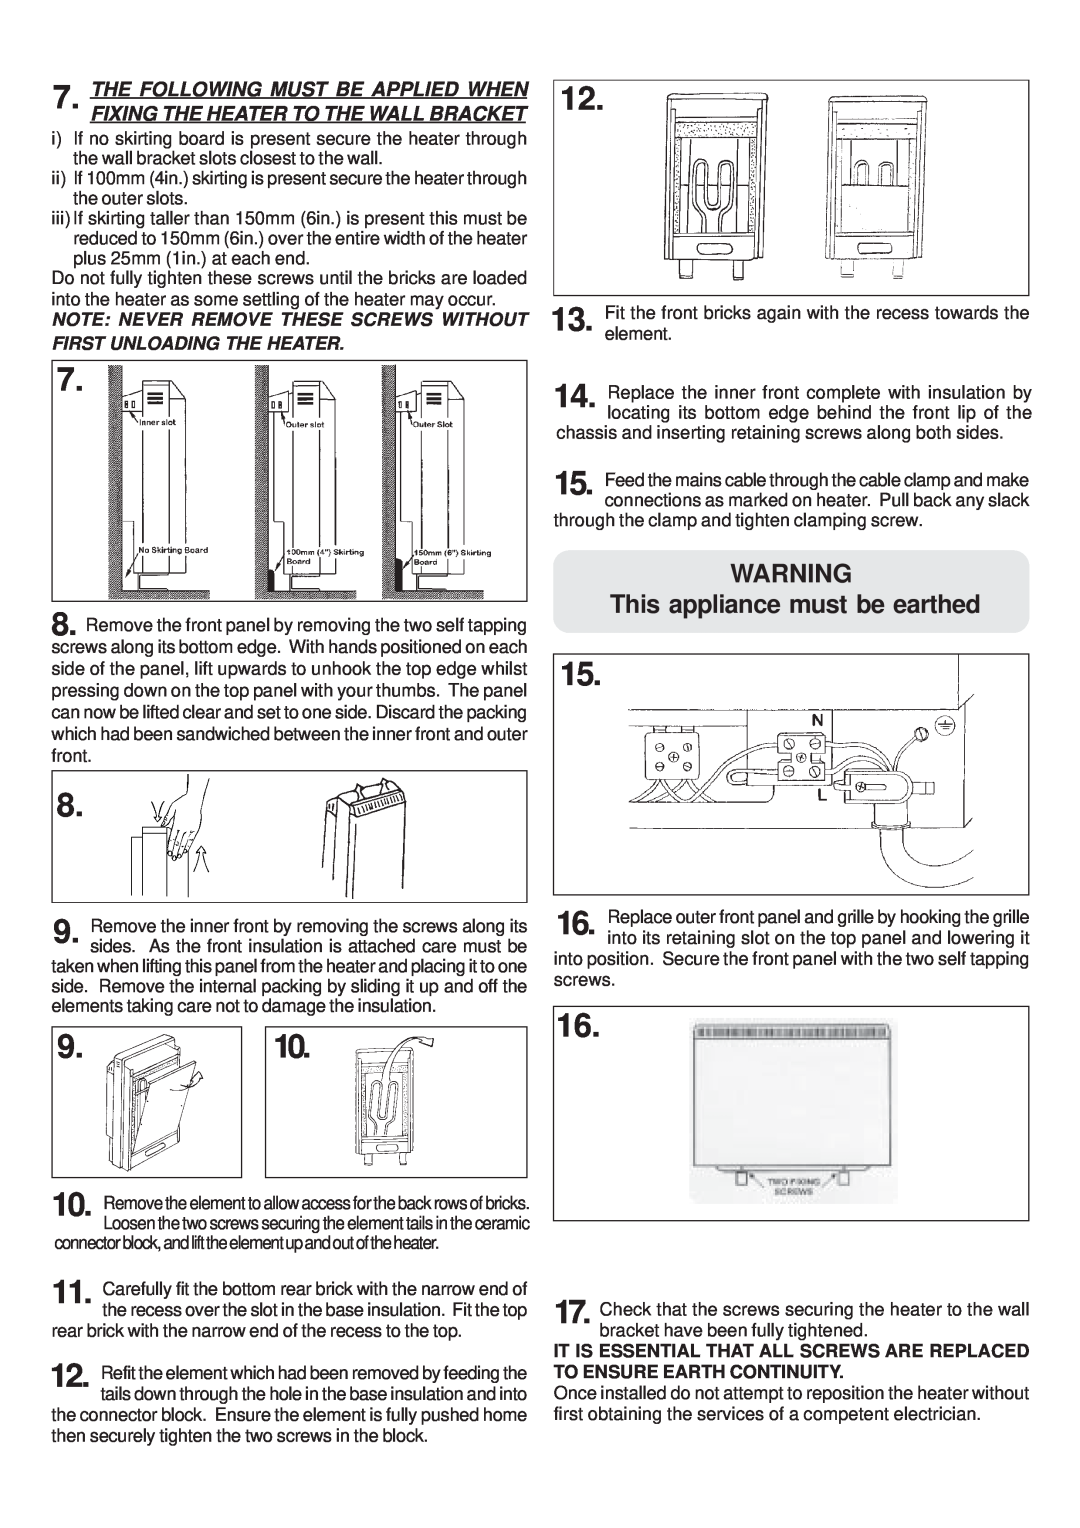 Dimplex XLS6N, XL6N installation instructions This appliance must be earthed 